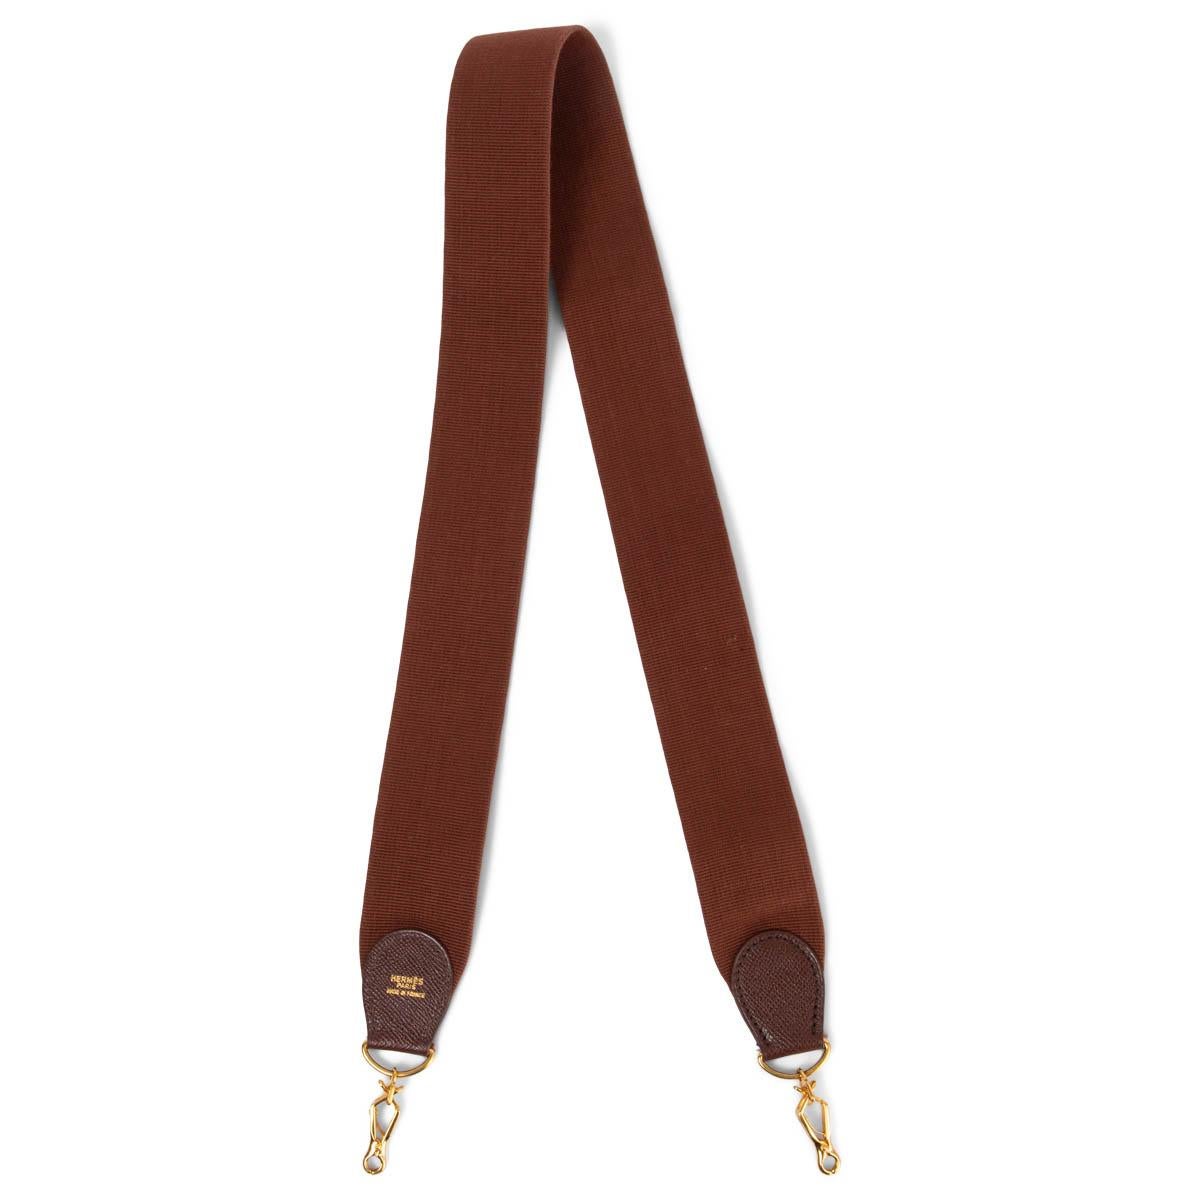 HERMES Chocolat brown Courchevel leather & canvas SANGLE KELLY 50mm Bag Strap